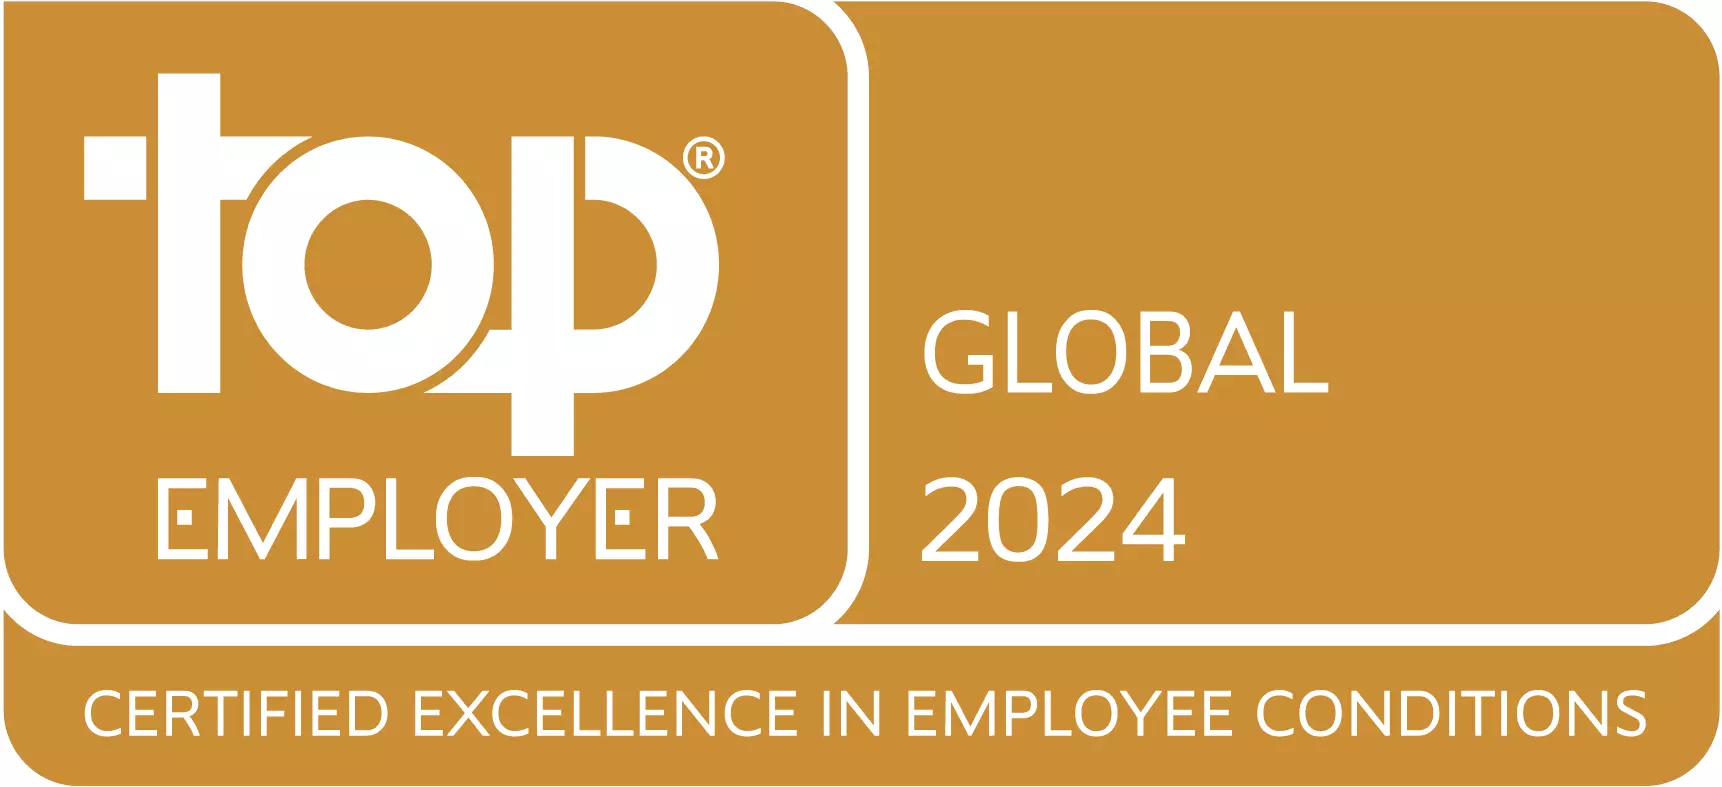 Top_Employer_Global_2024.png